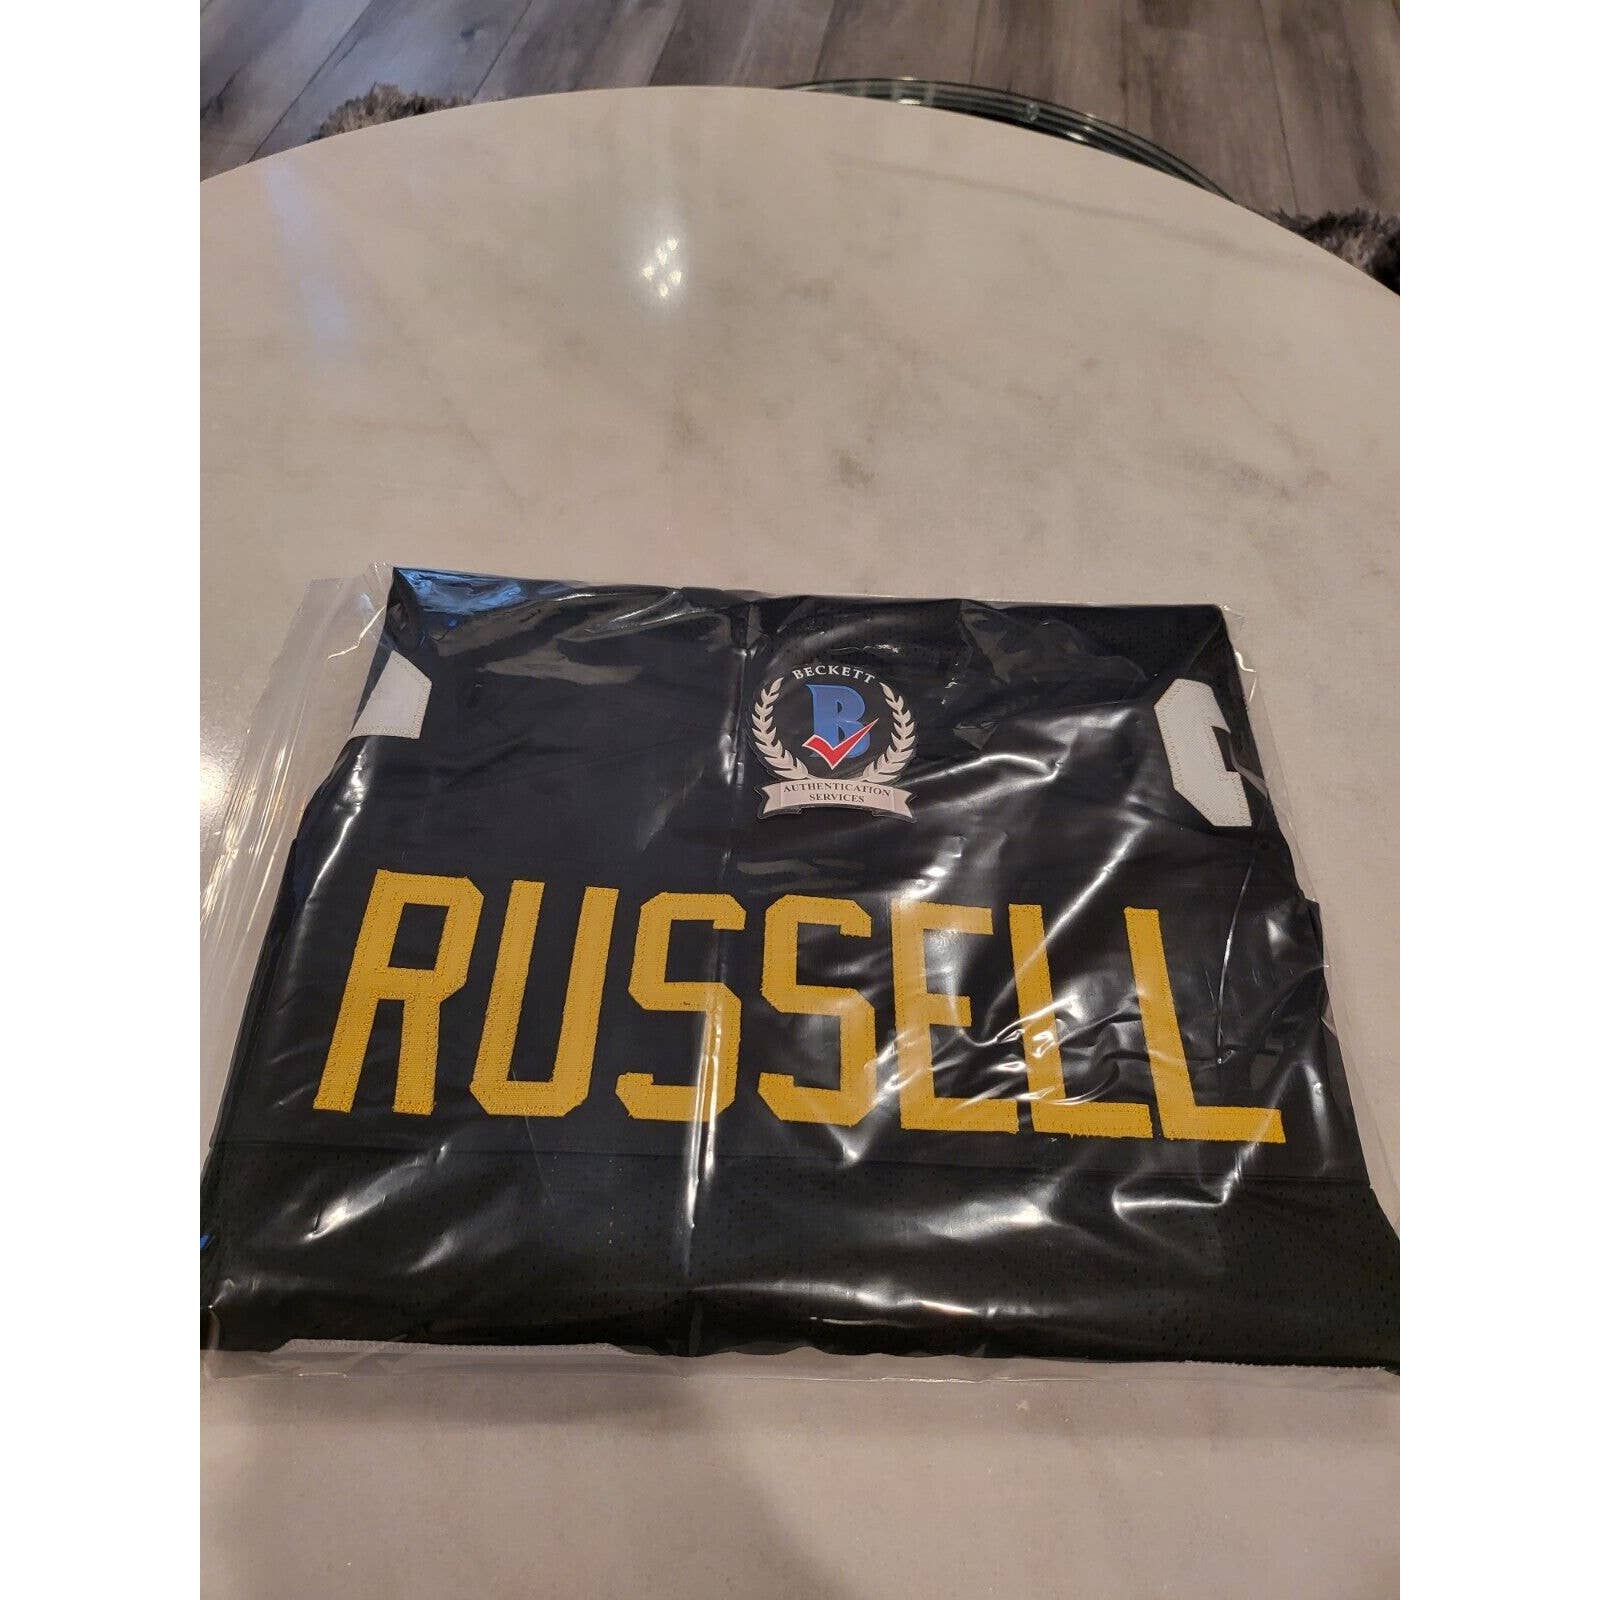 Andy Russell Autographed/Signed Jersey Beckett COA Pittsburgh Steelers - TreasuresEvolved